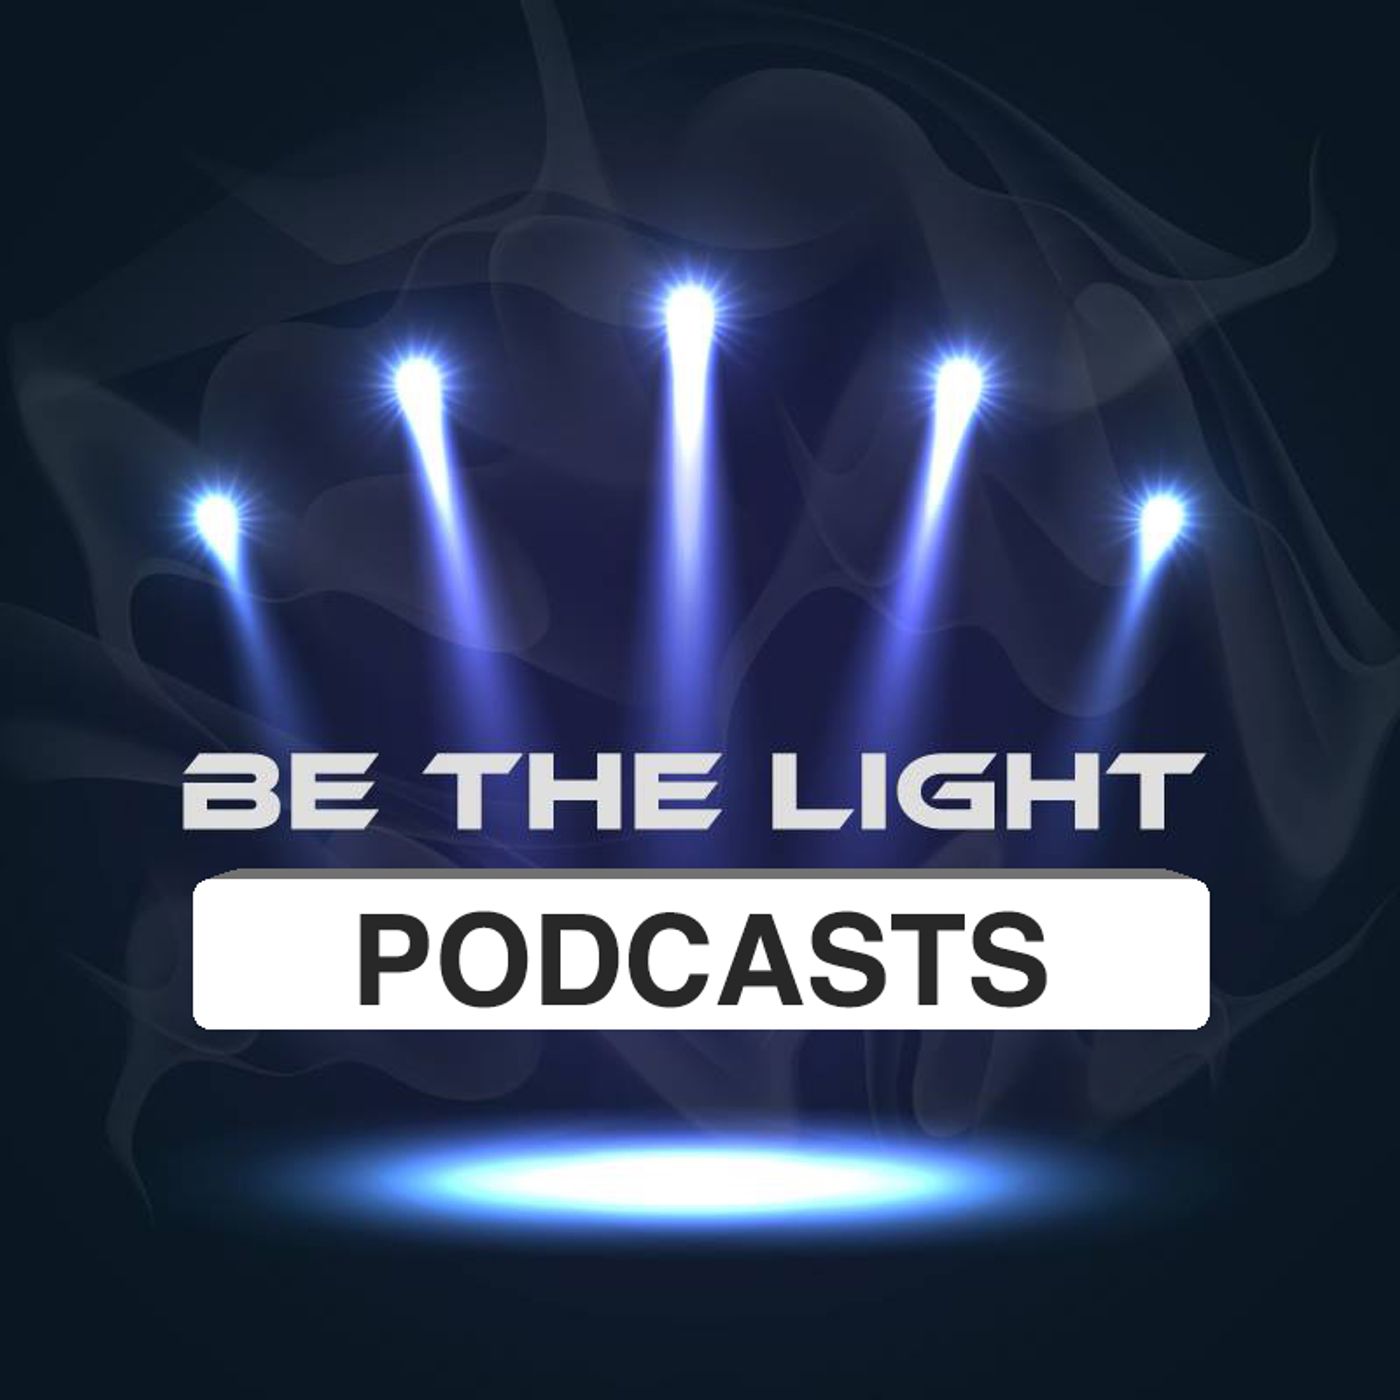 BE THE LIGHT PODCASTS